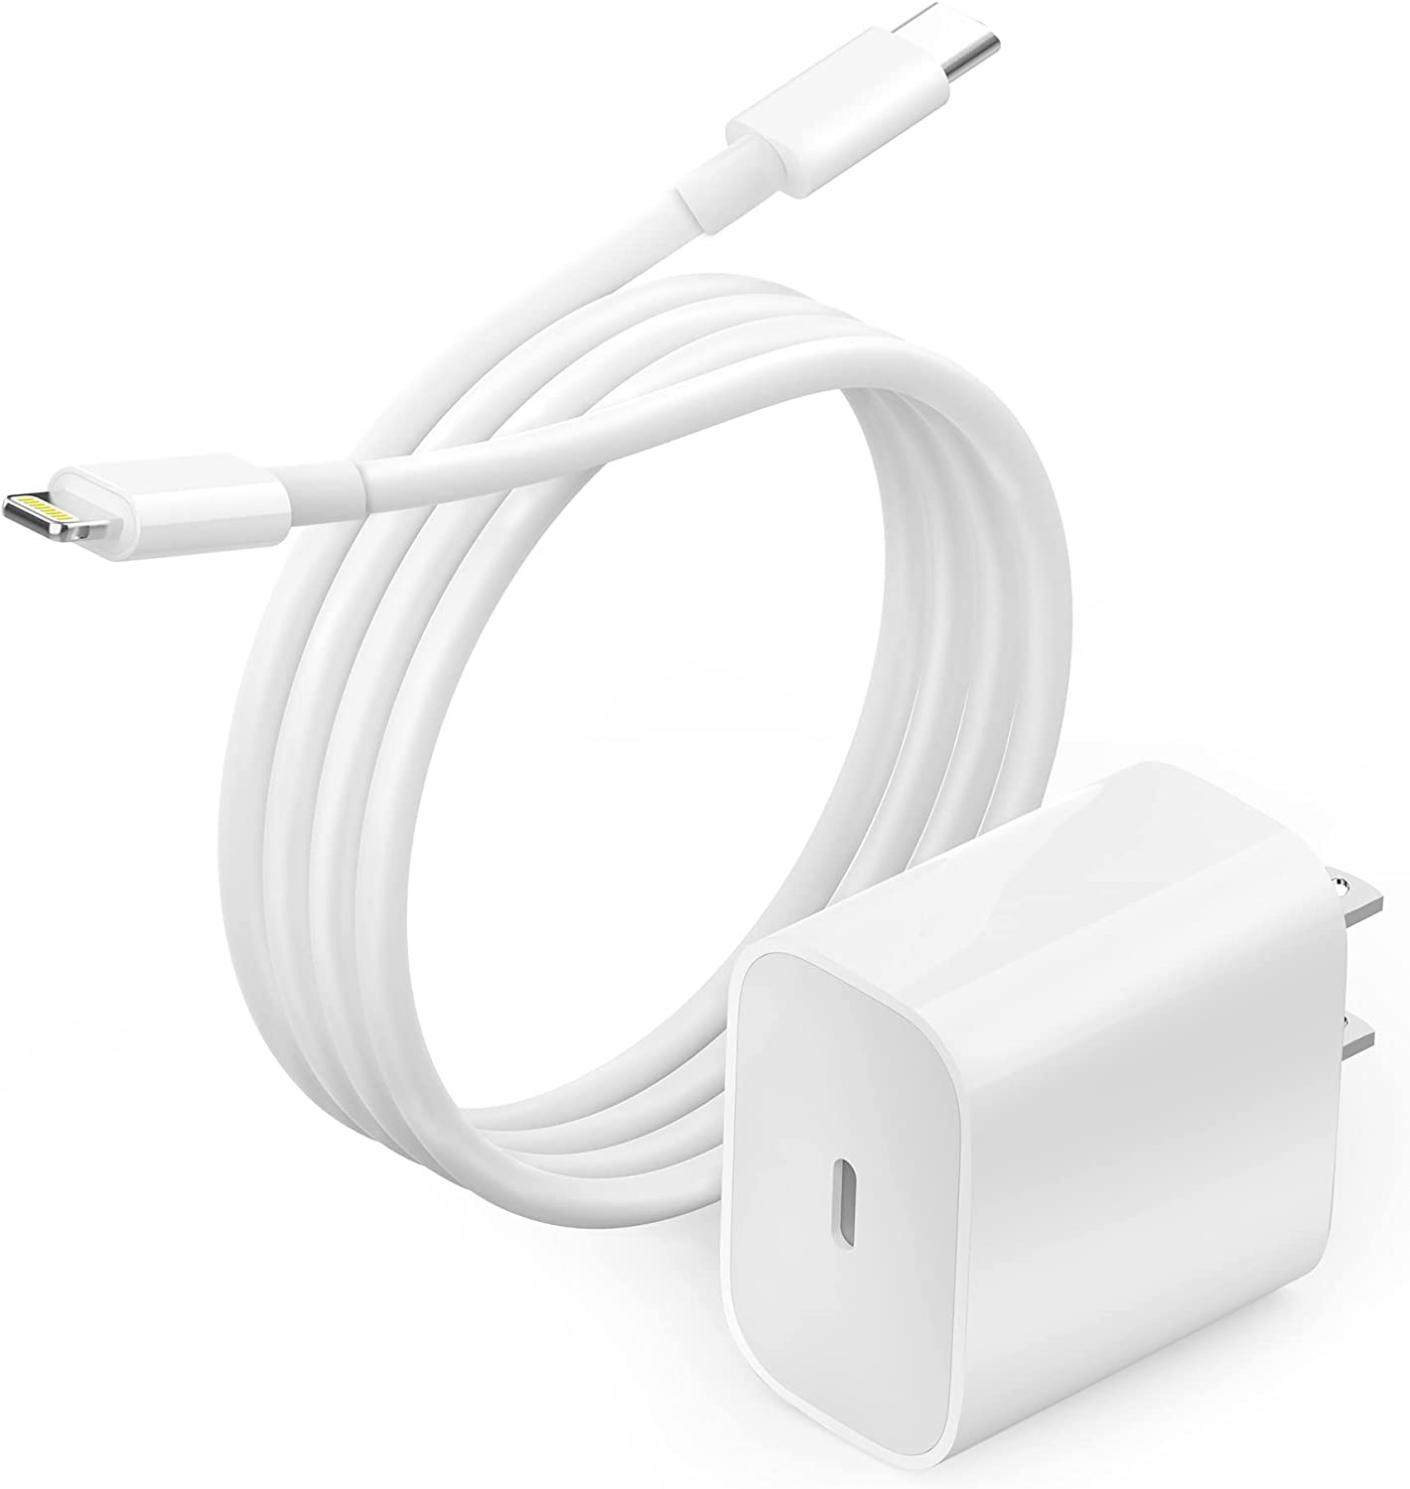 iPhone Fast Charger[Apple MFi Certified], iPhone 14 13 12 11 USB C Power Wall Charger with 6FT Cable, Lightning Cable for iPhone 13/13 Pro Max/12/12 Mini/Pro/11/XS/X/8Plus/iPad AirPods